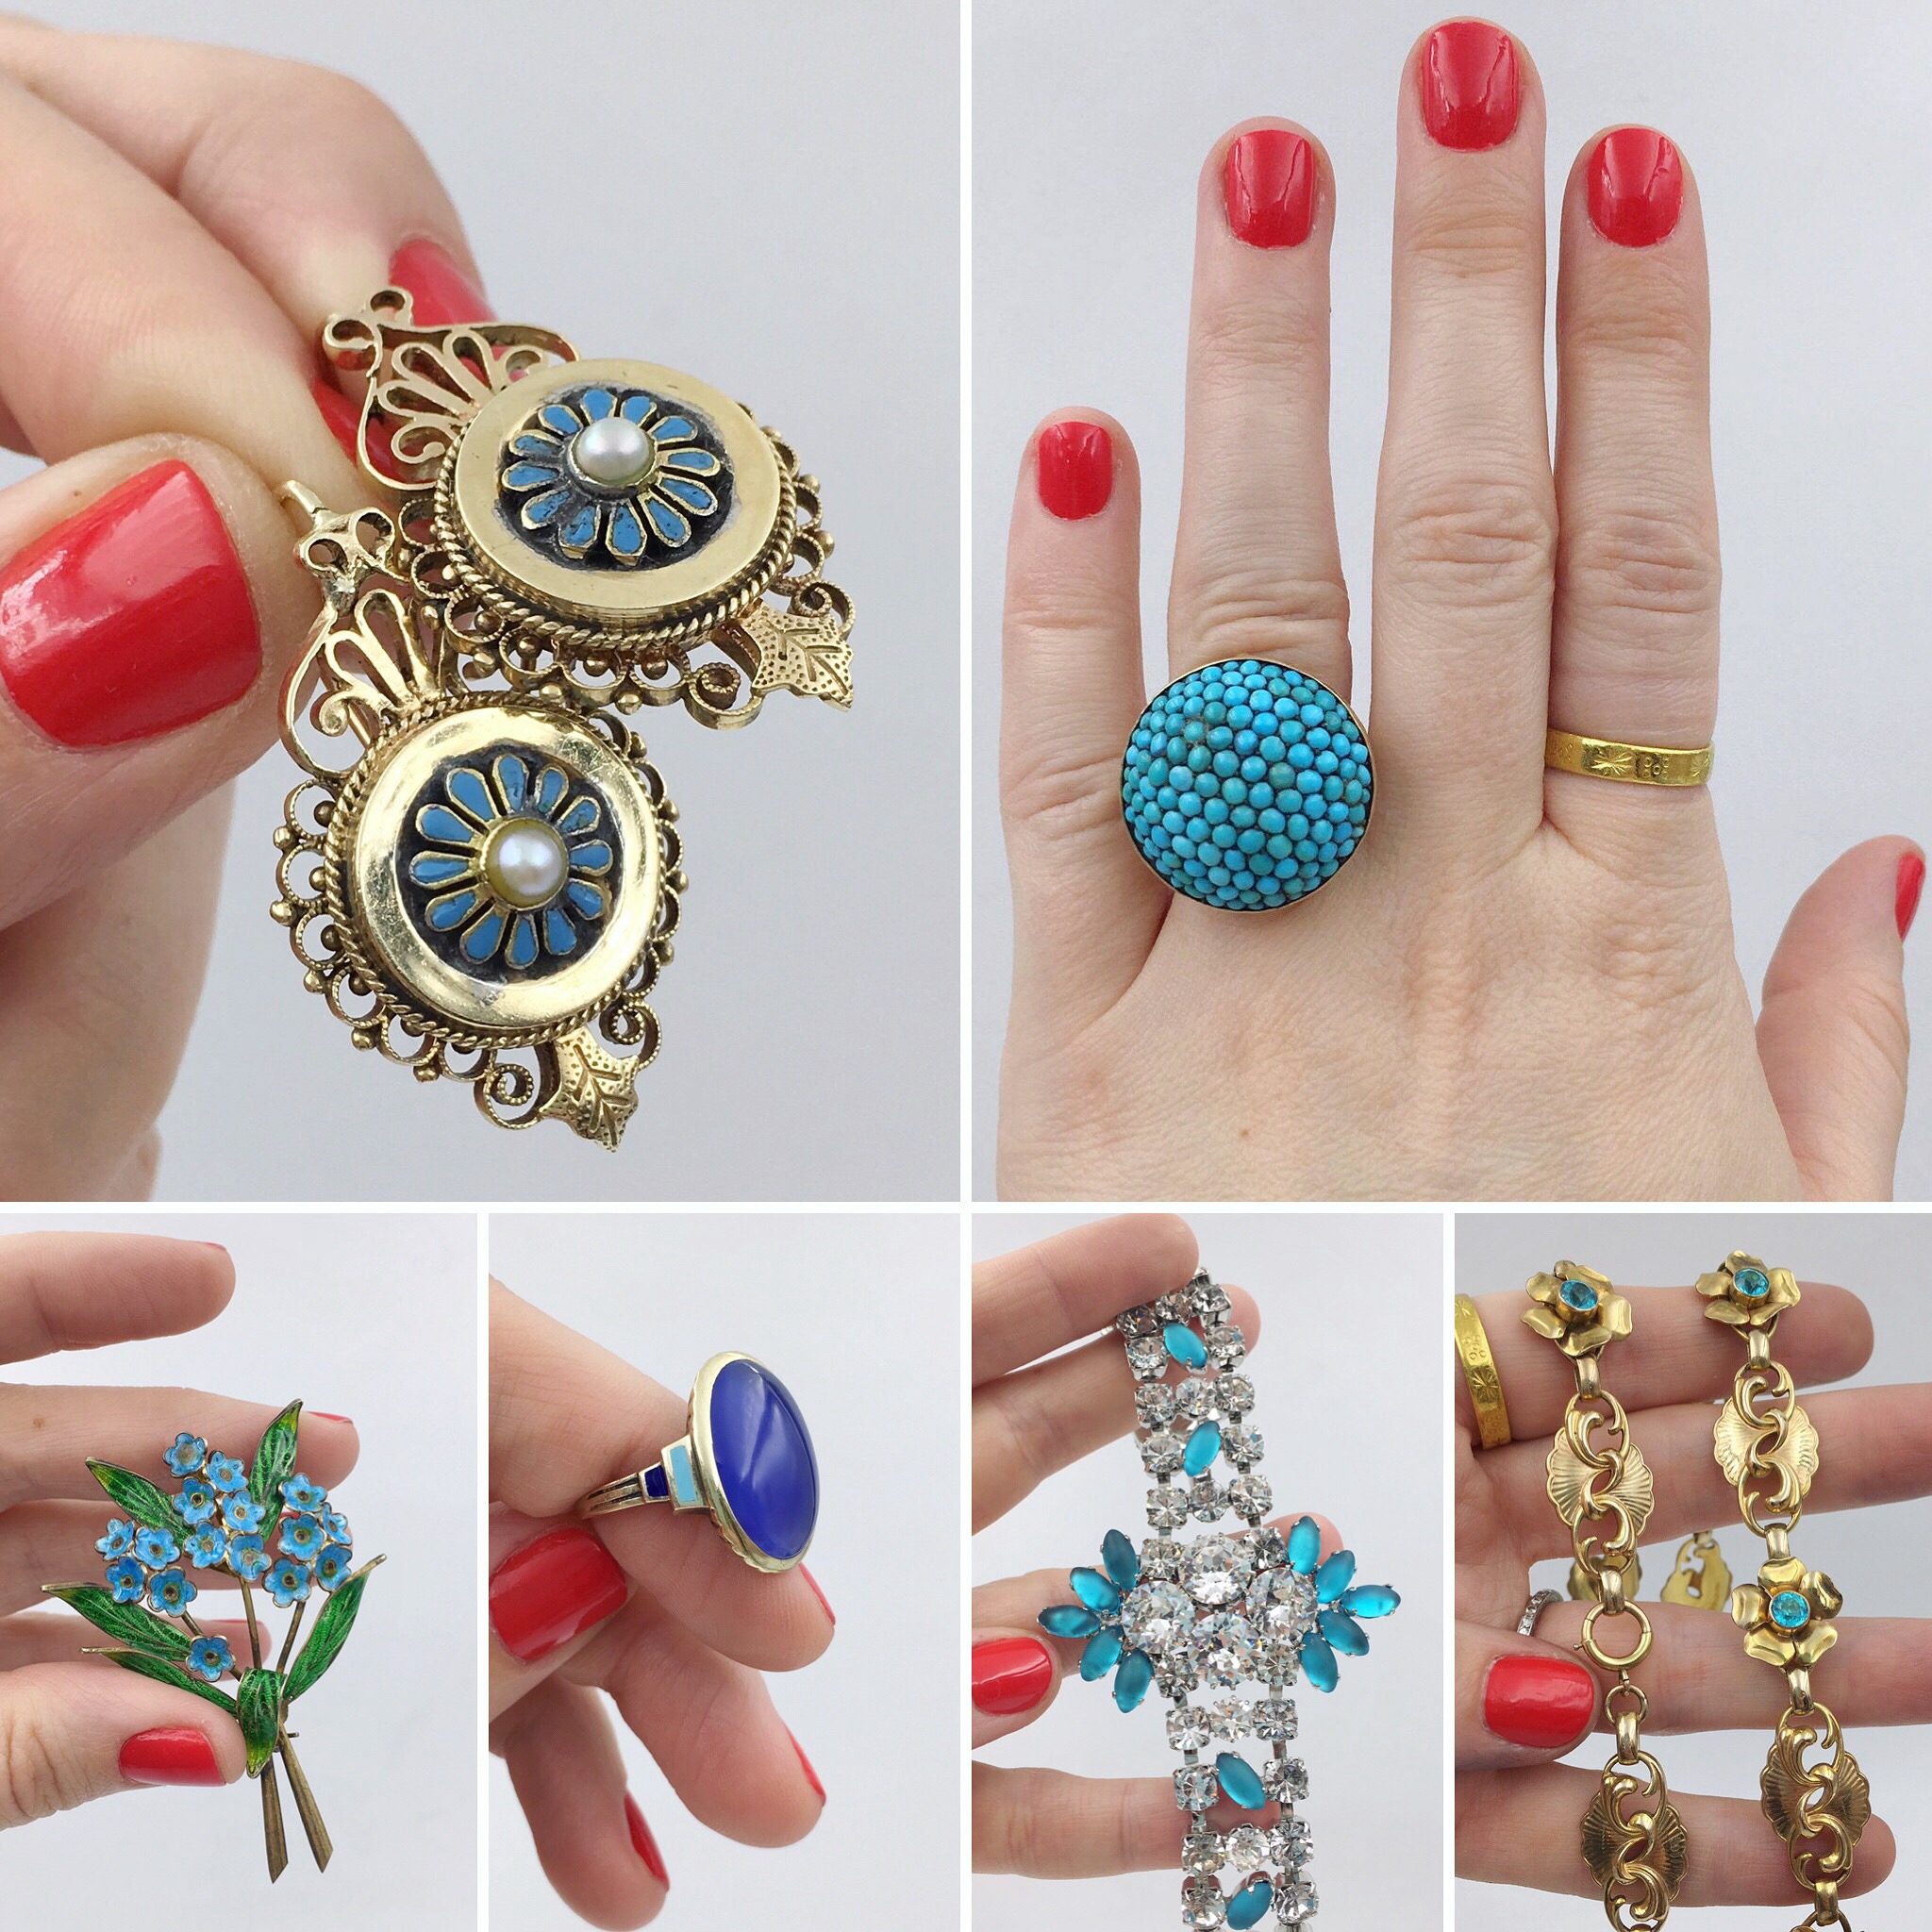 Best antique jewelry NYCoriginal Miami Beach antique show Reverie vintage and estate jewelry